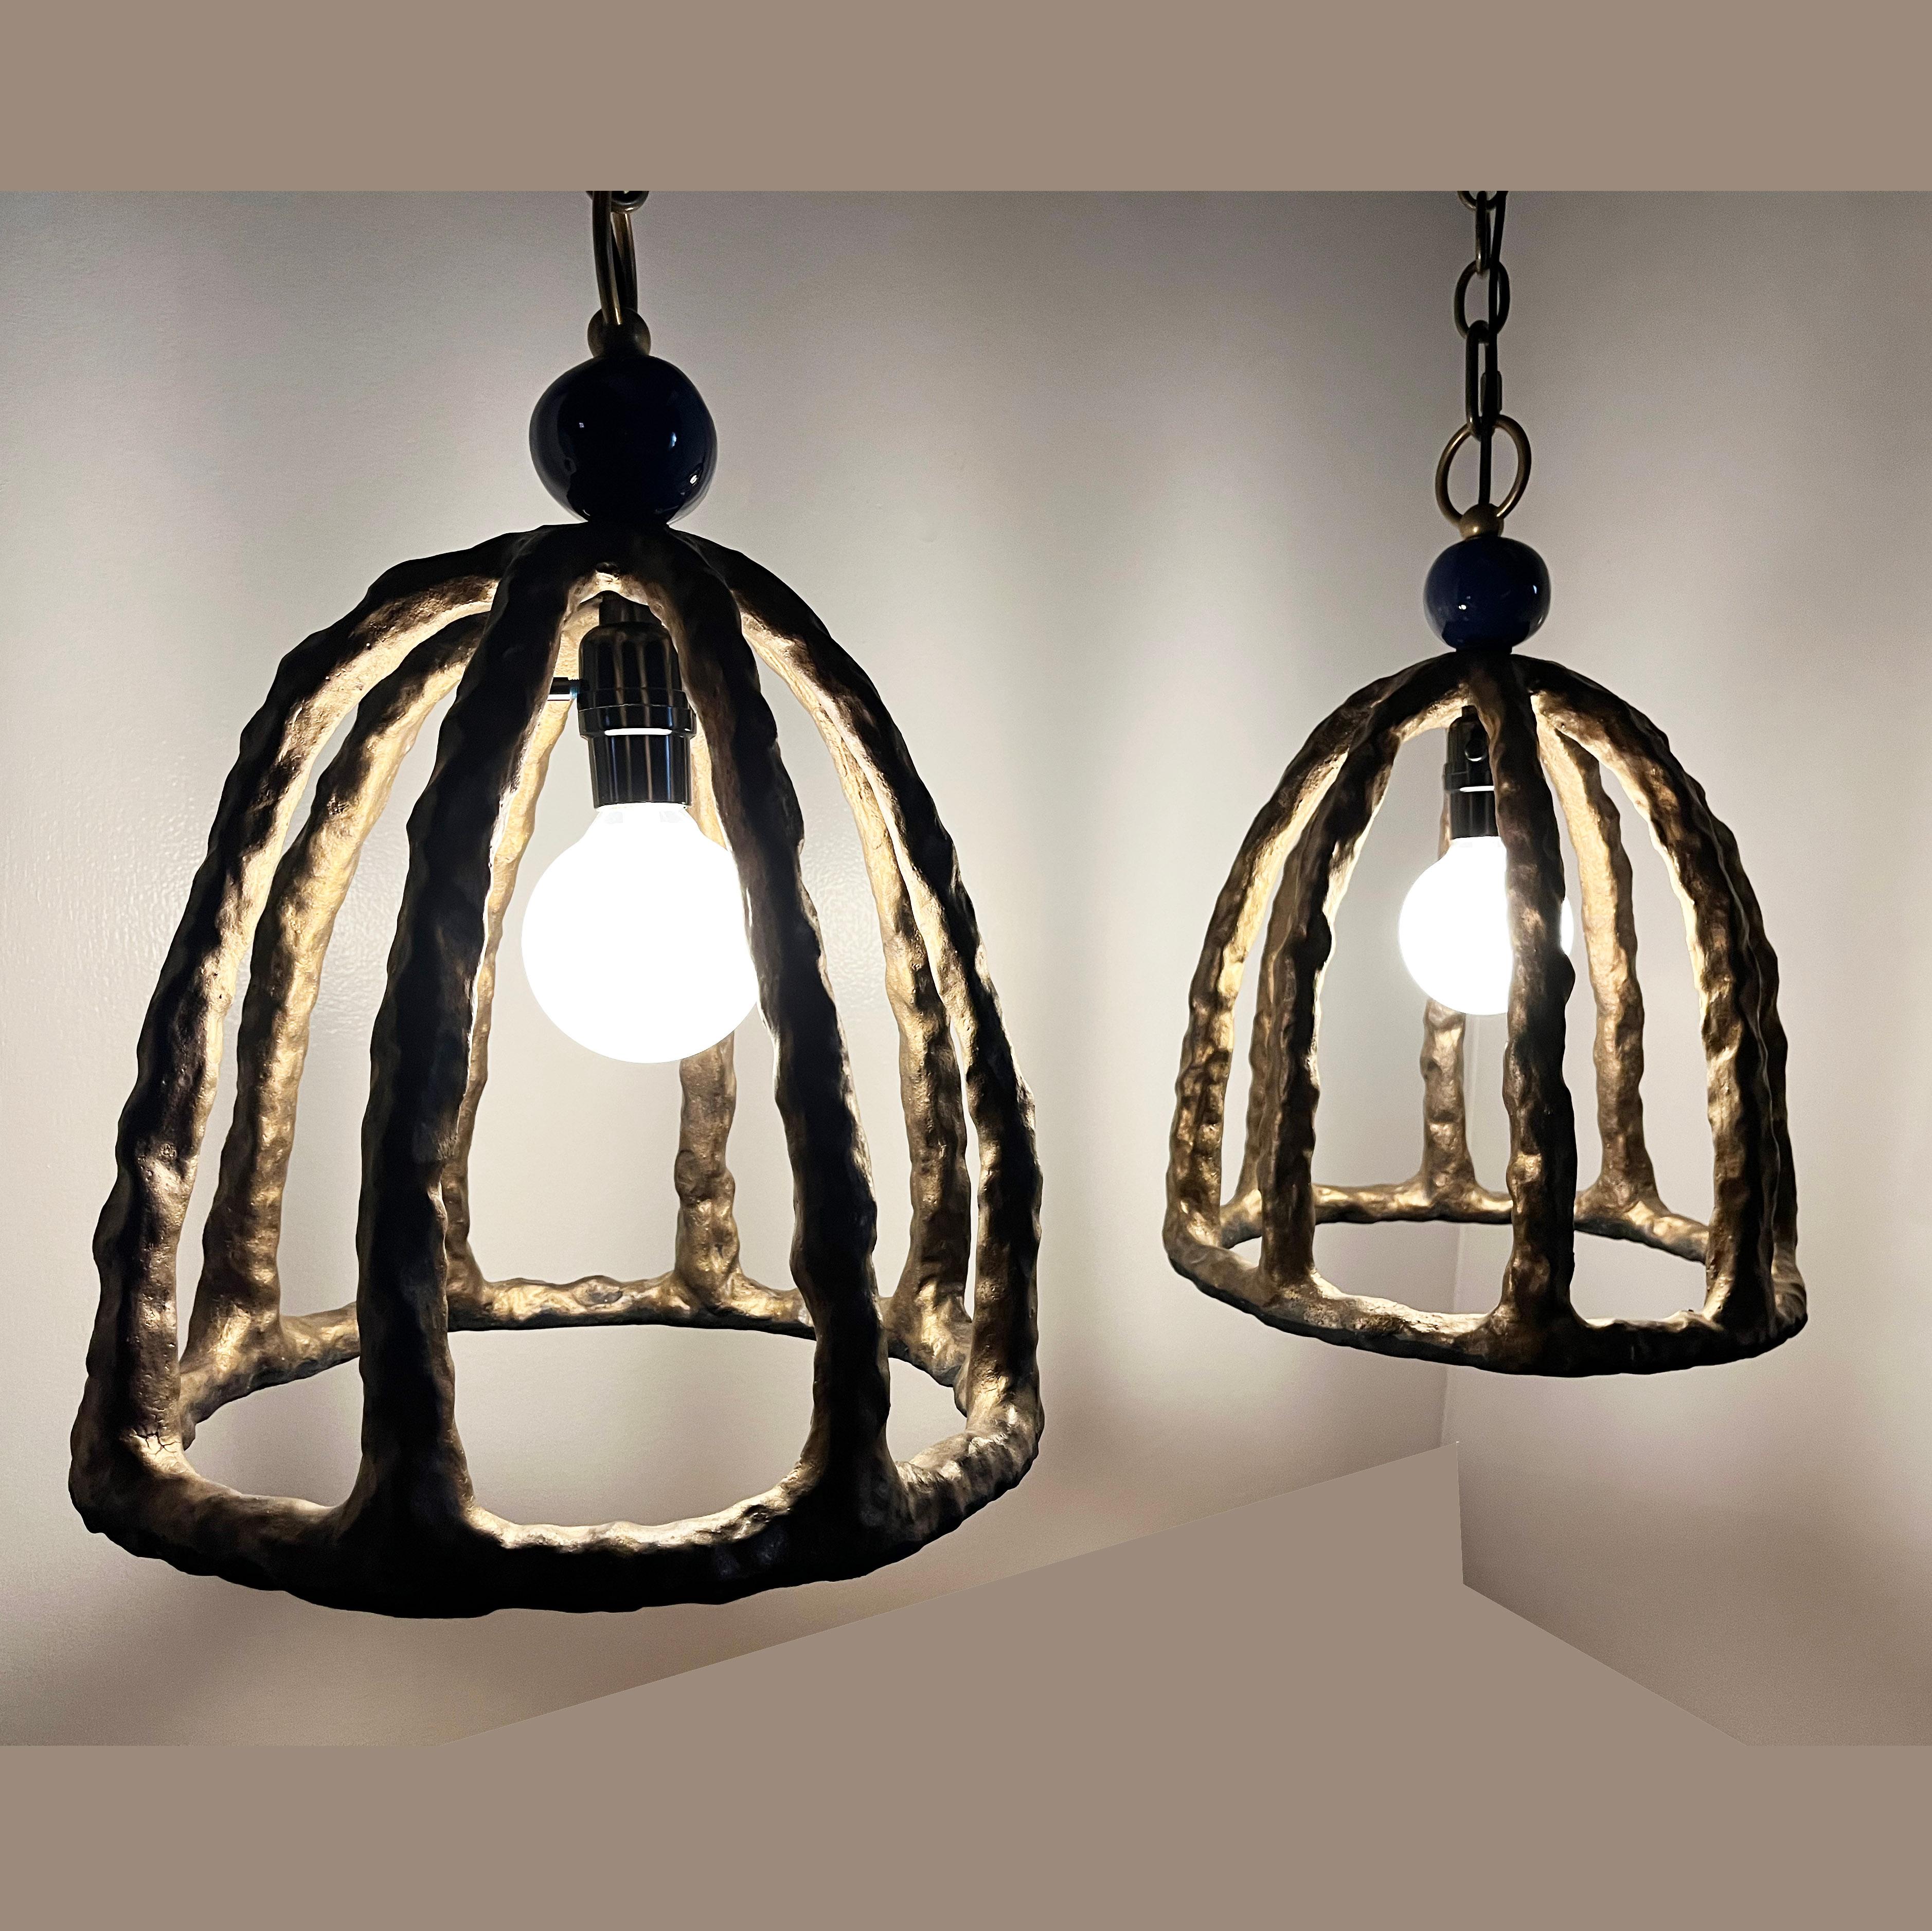 Brutalist Birdcage Stoneware Pendant Lamp Pair by Olivia Barry / By Hand Eclectic Mix For Sale